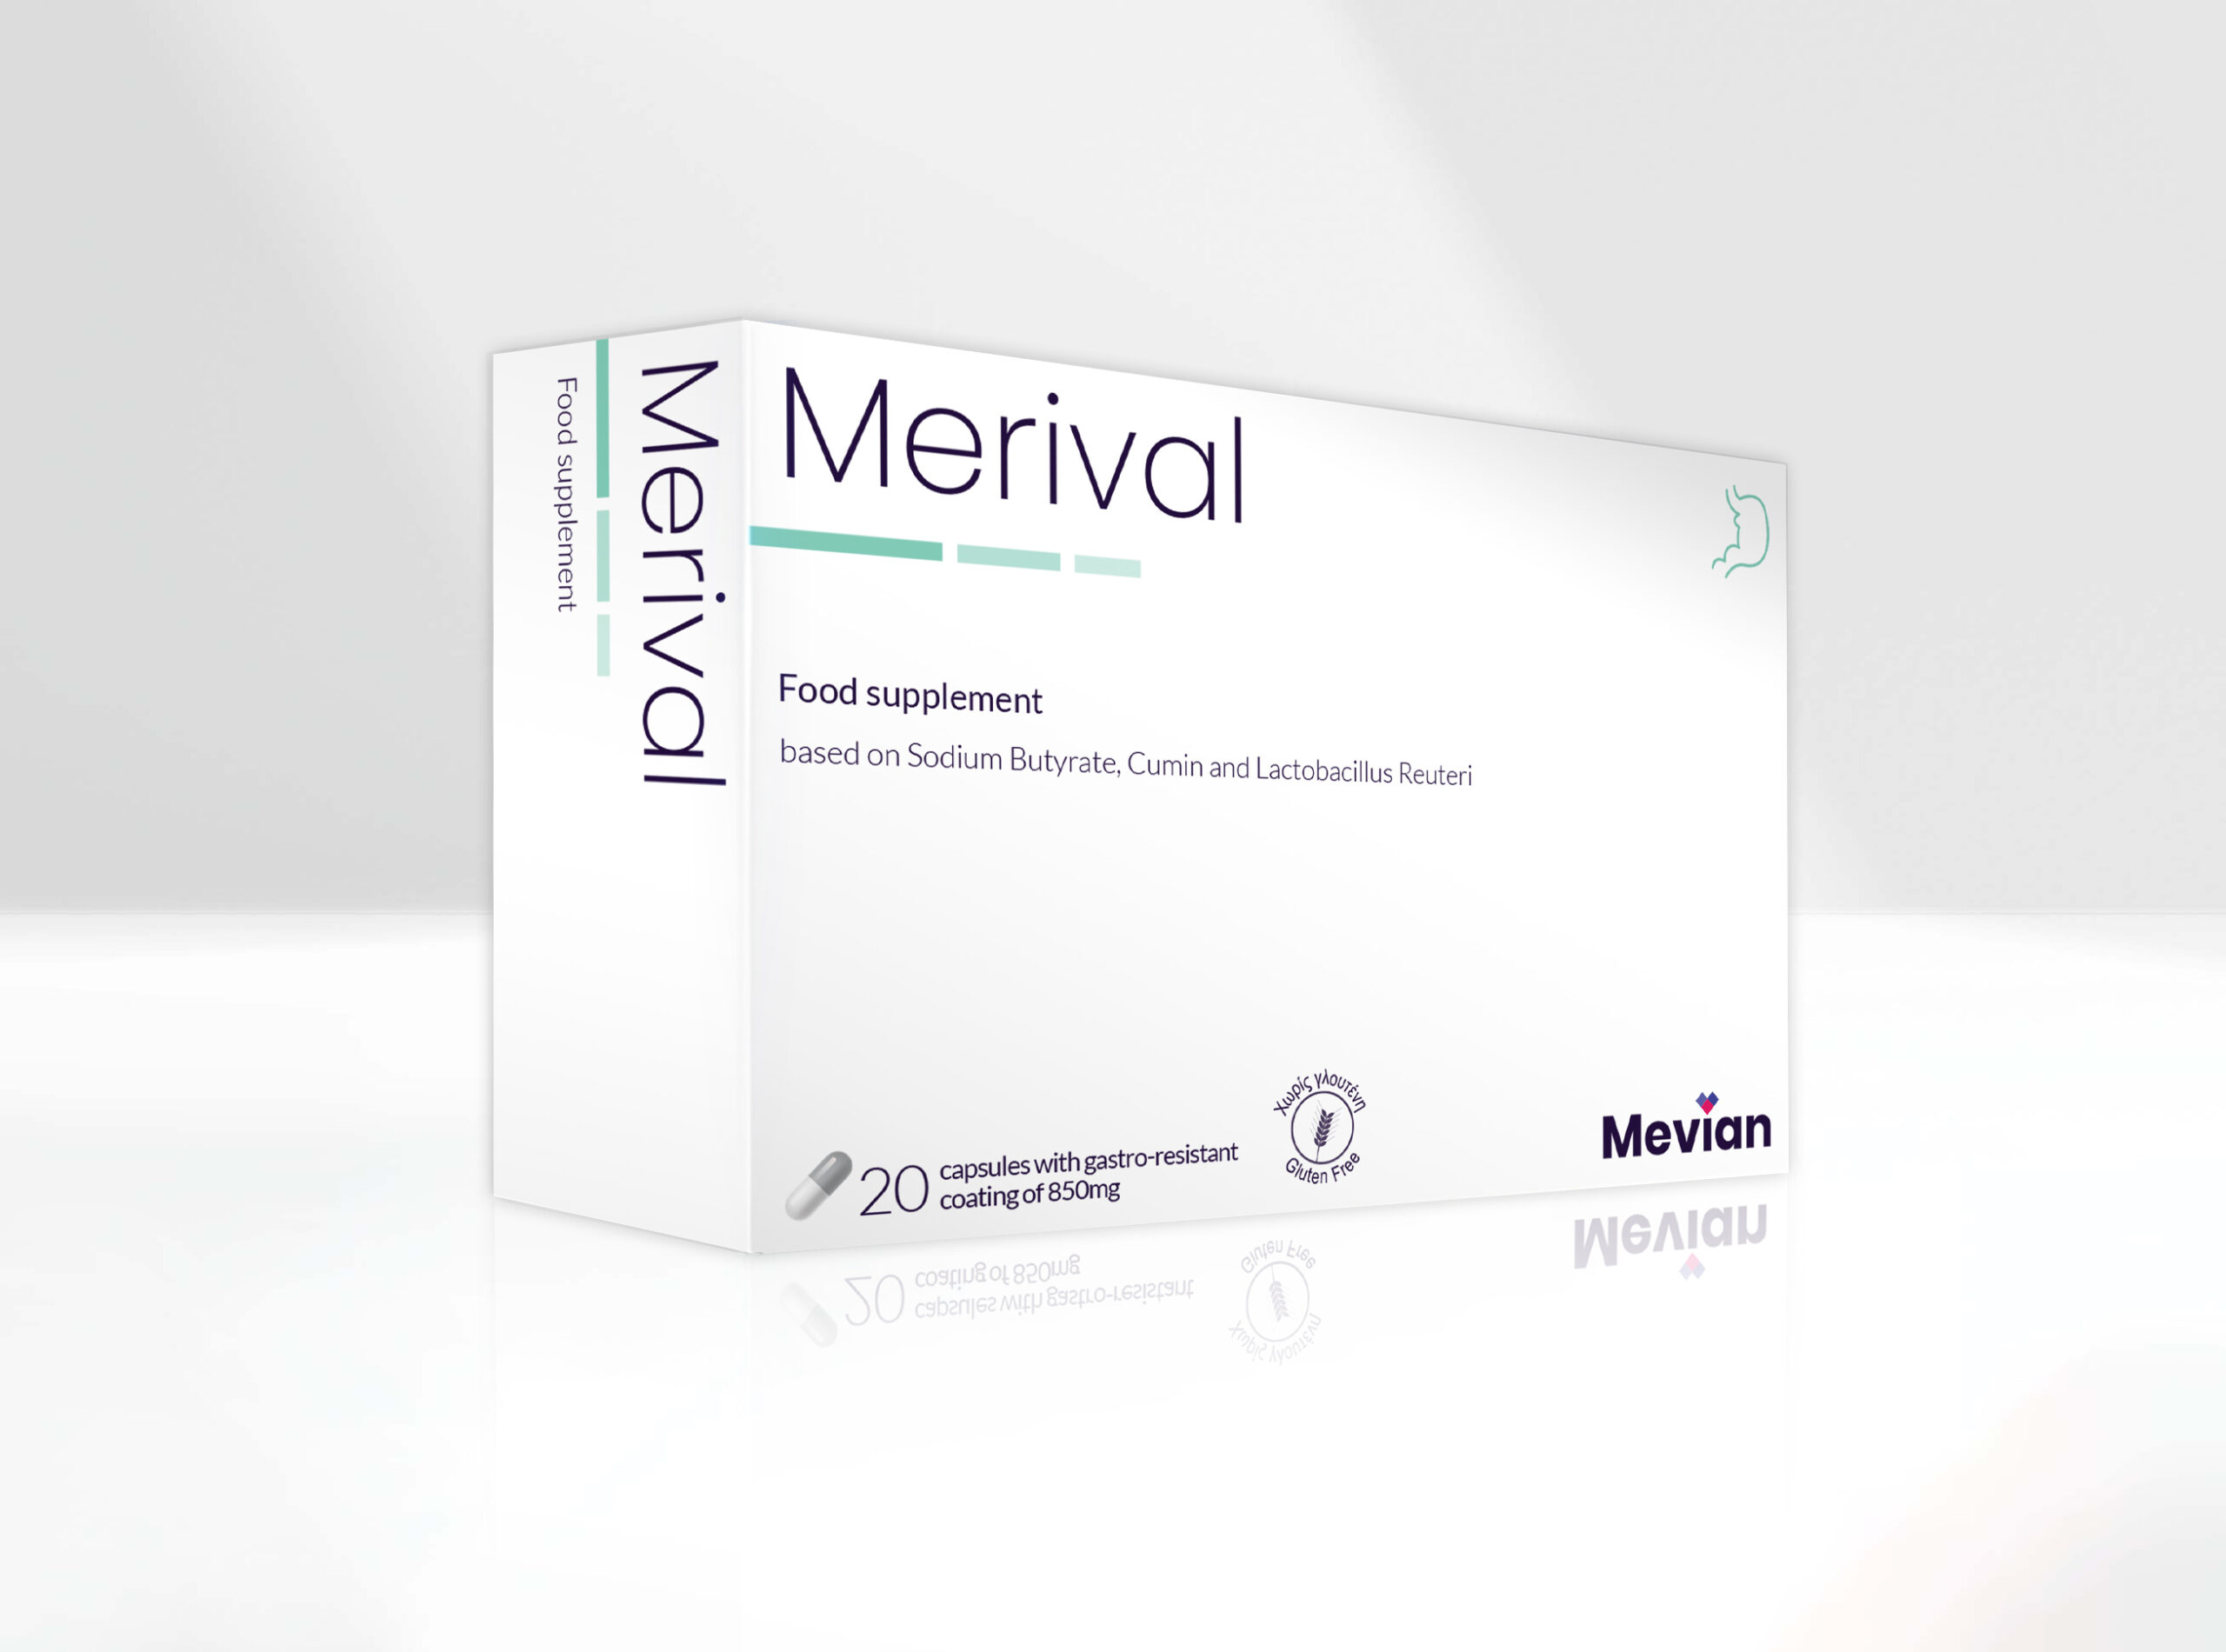 Merival enables gastrointestinal motility by the elimination of gases while balancing the intestinal bacterial flora (suitable for Irritable bowel syndrome and intestinal inflammation.